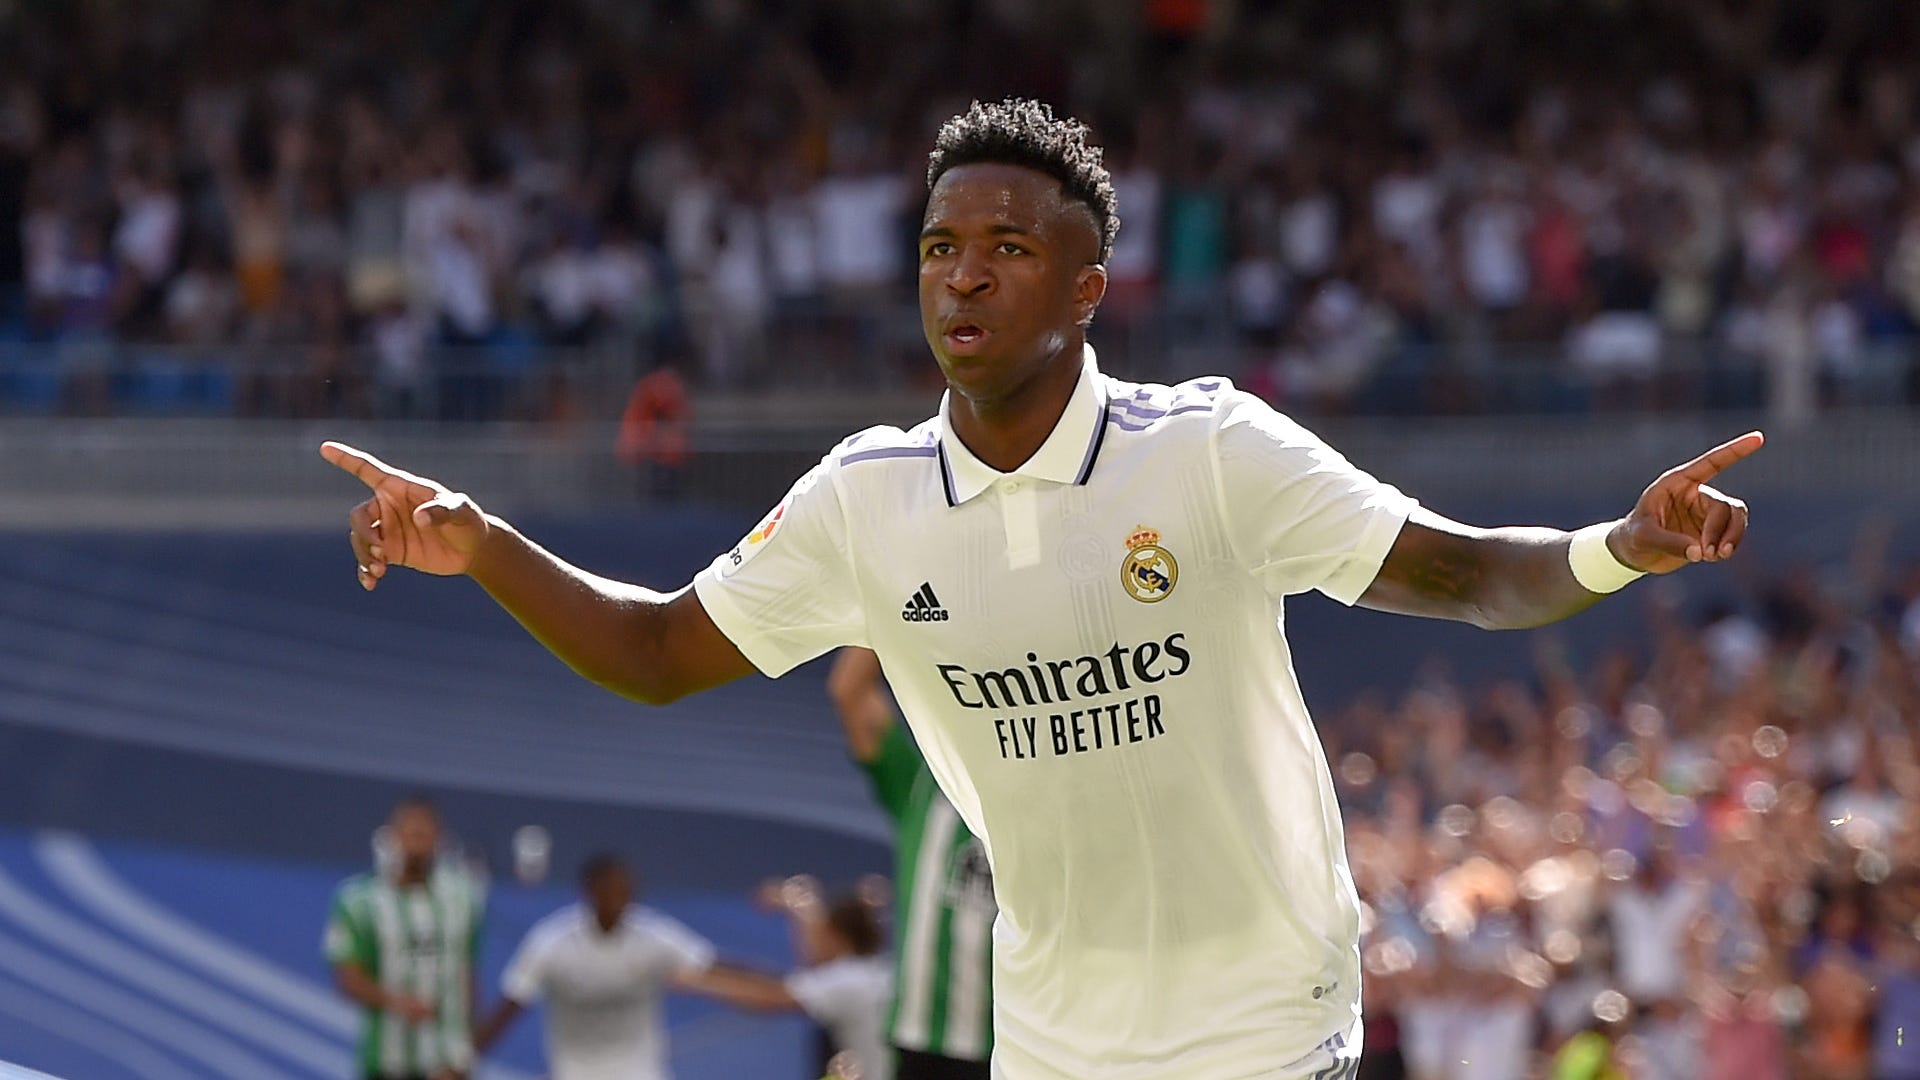 Celtic vs Real Madrid Live stream, TV channel, kick-off time and how to watch Goal UK